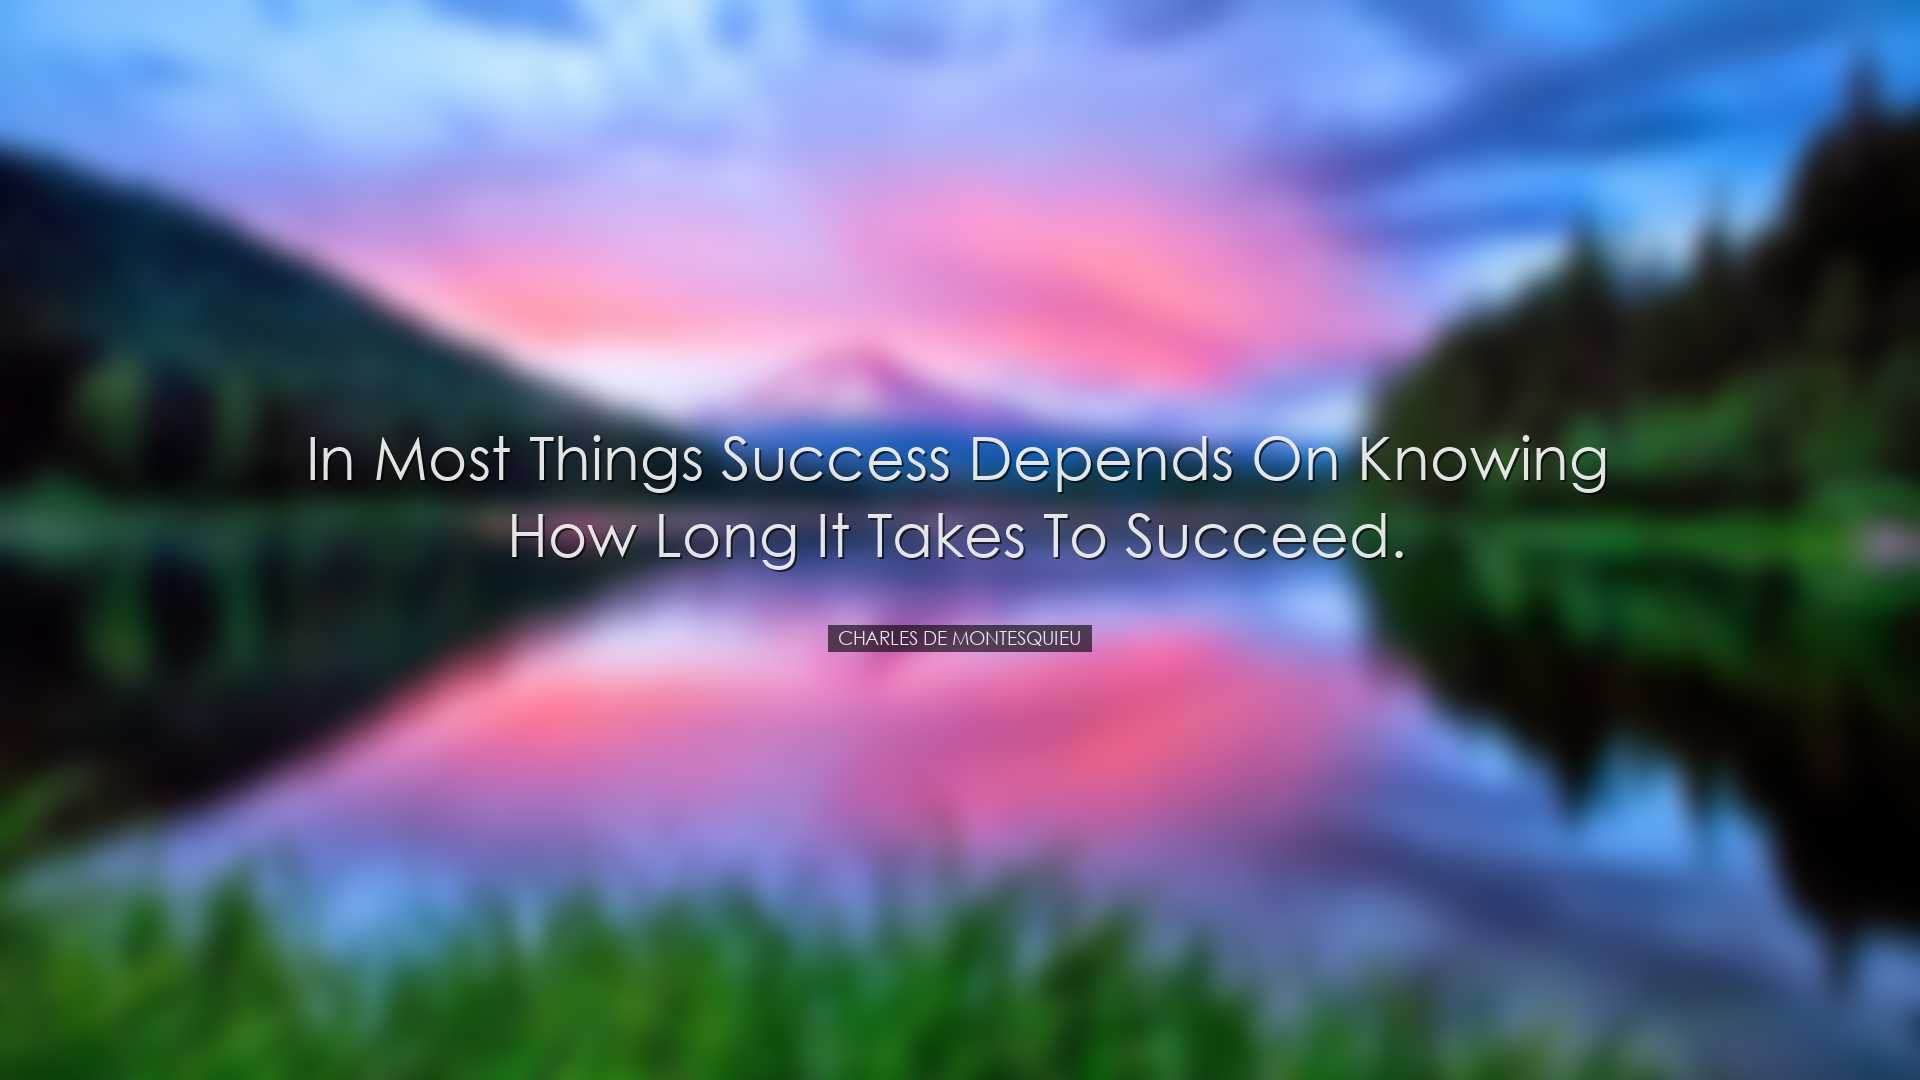 In most things success depends on knowing how long it takes to suc